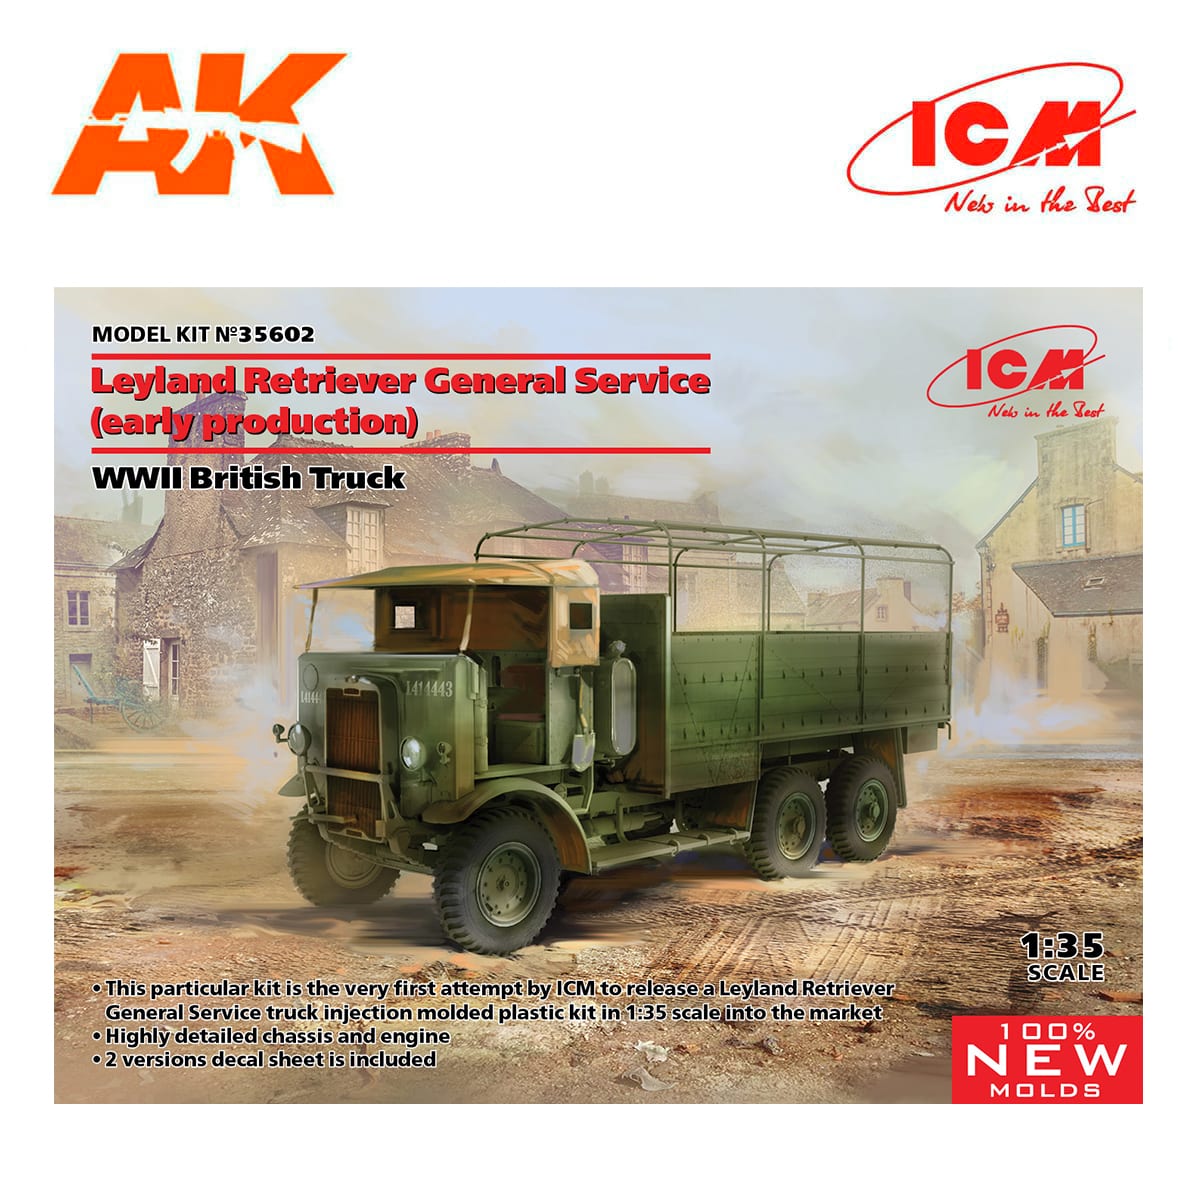 Leyland Retriever General Service (early production), WWII British Truck 1/35